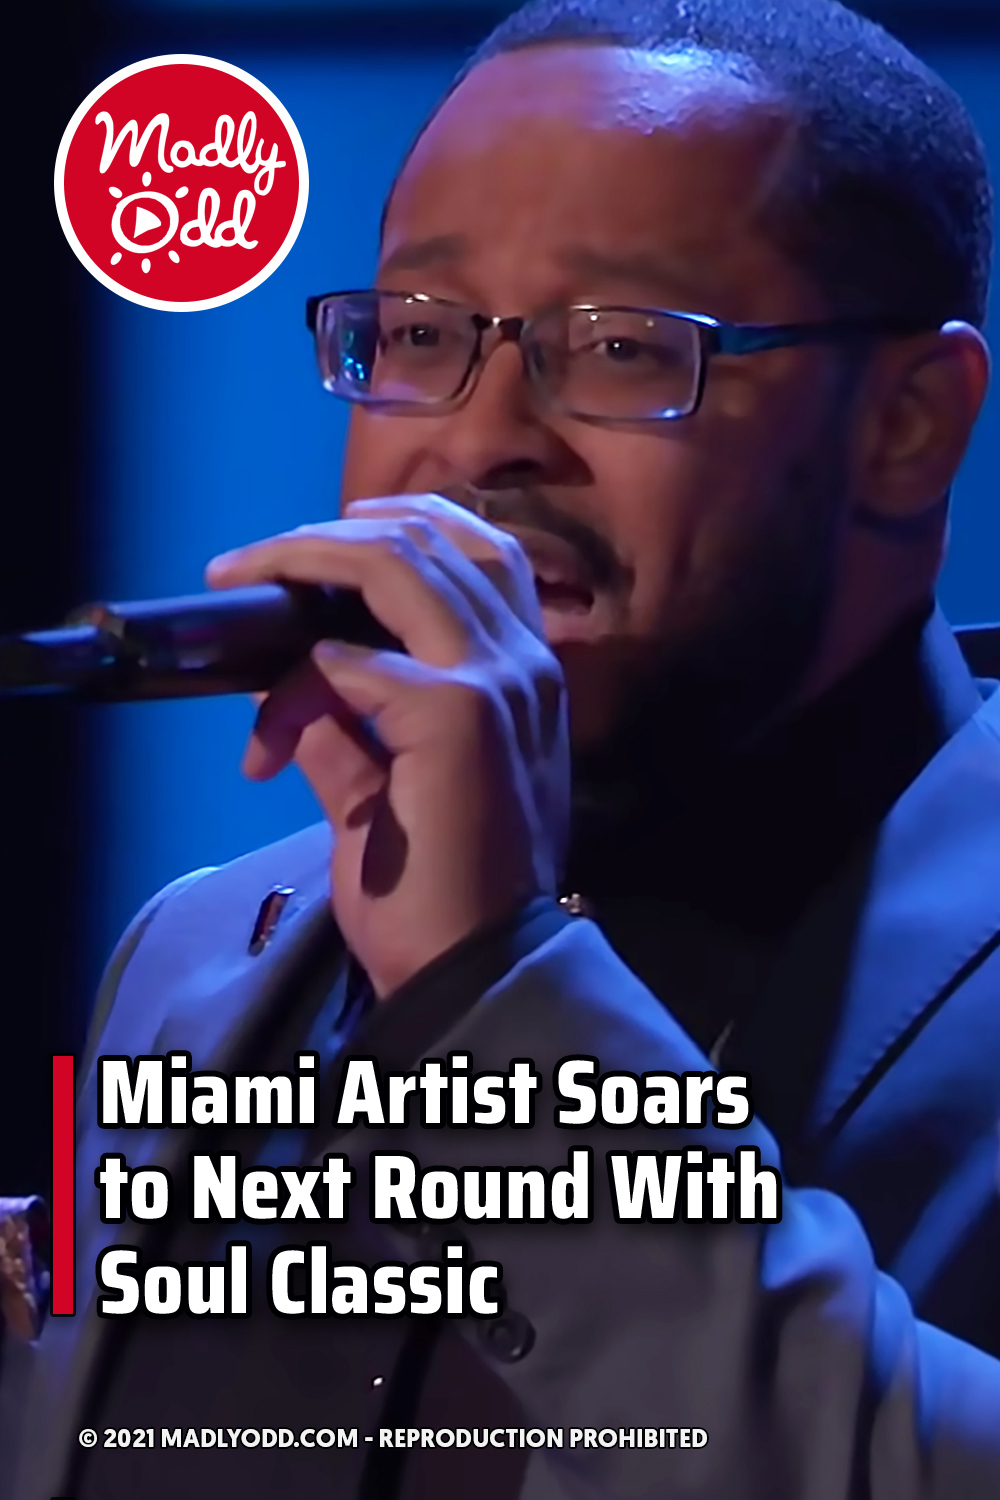 Miami Artist Soars to Next Round With Soul Classic